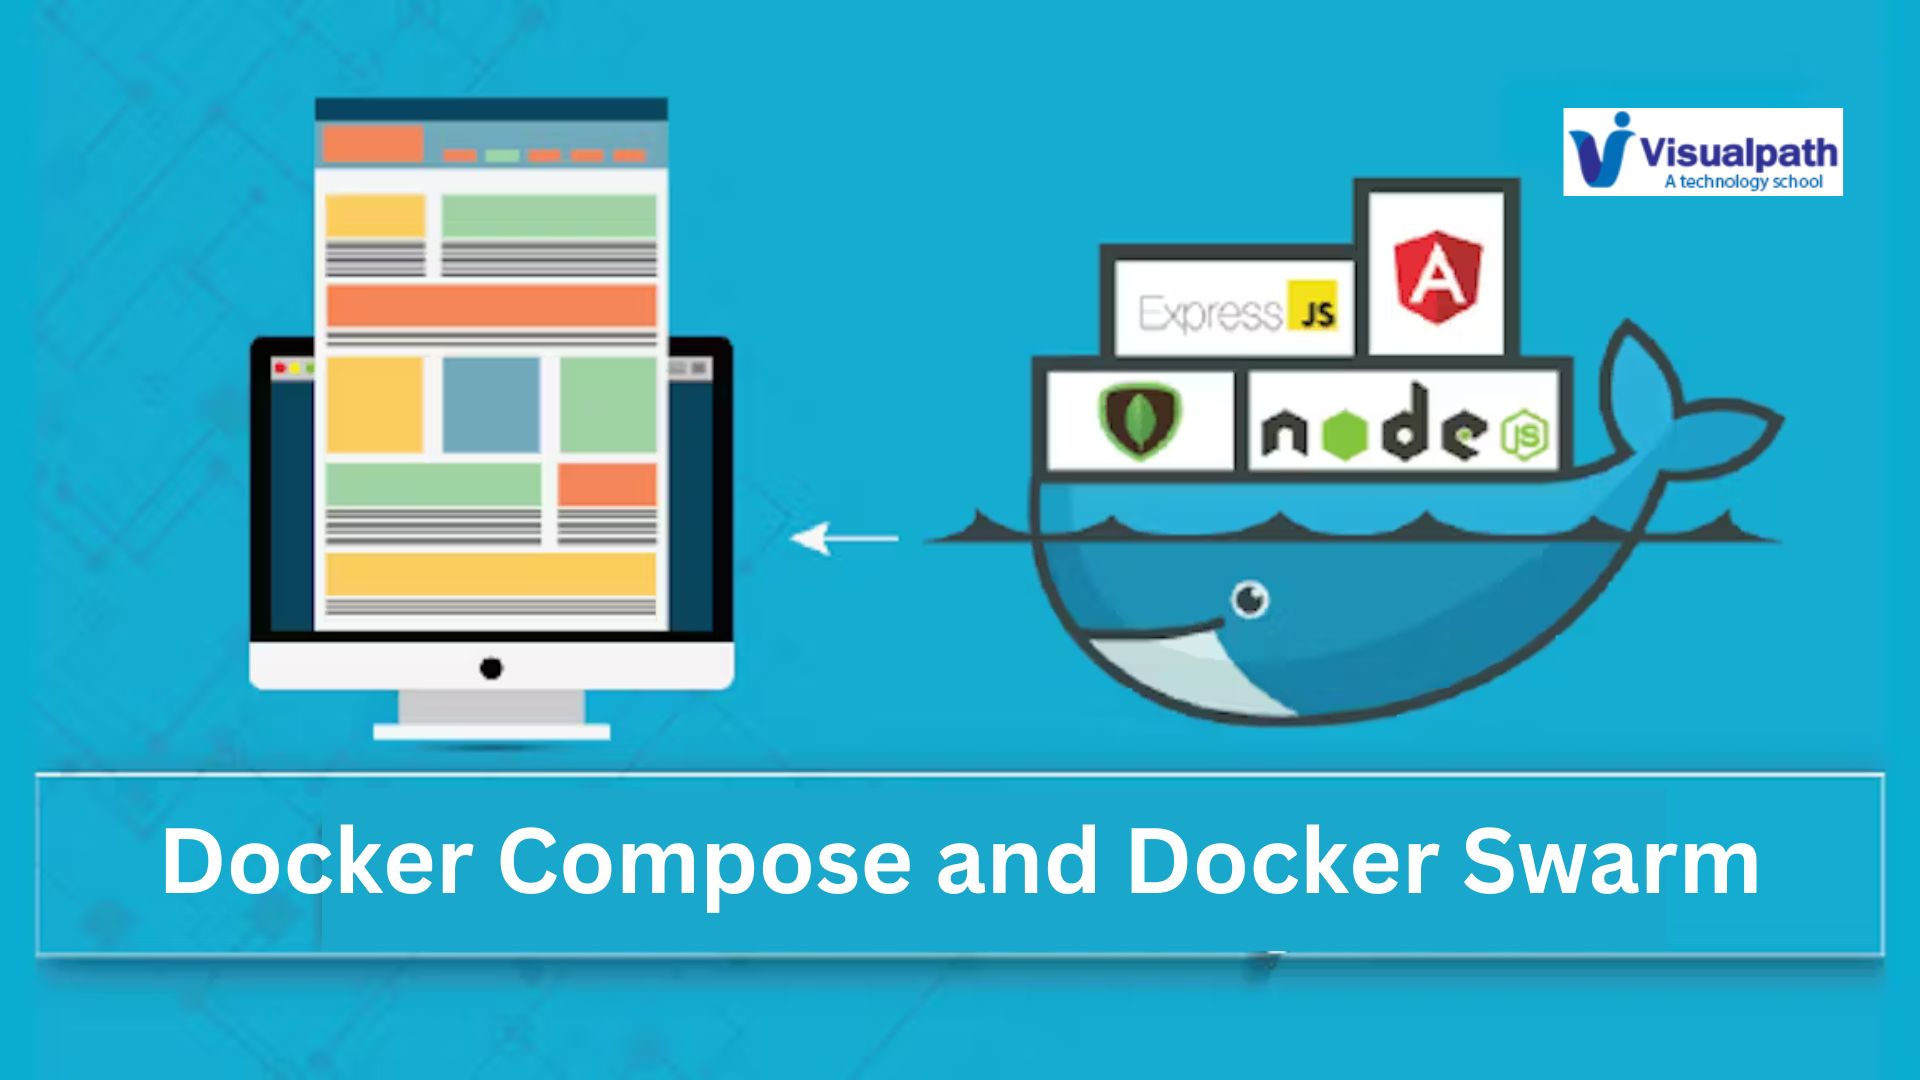 Container Orchestration: Comparison of Docker Compose and Docker Swarm